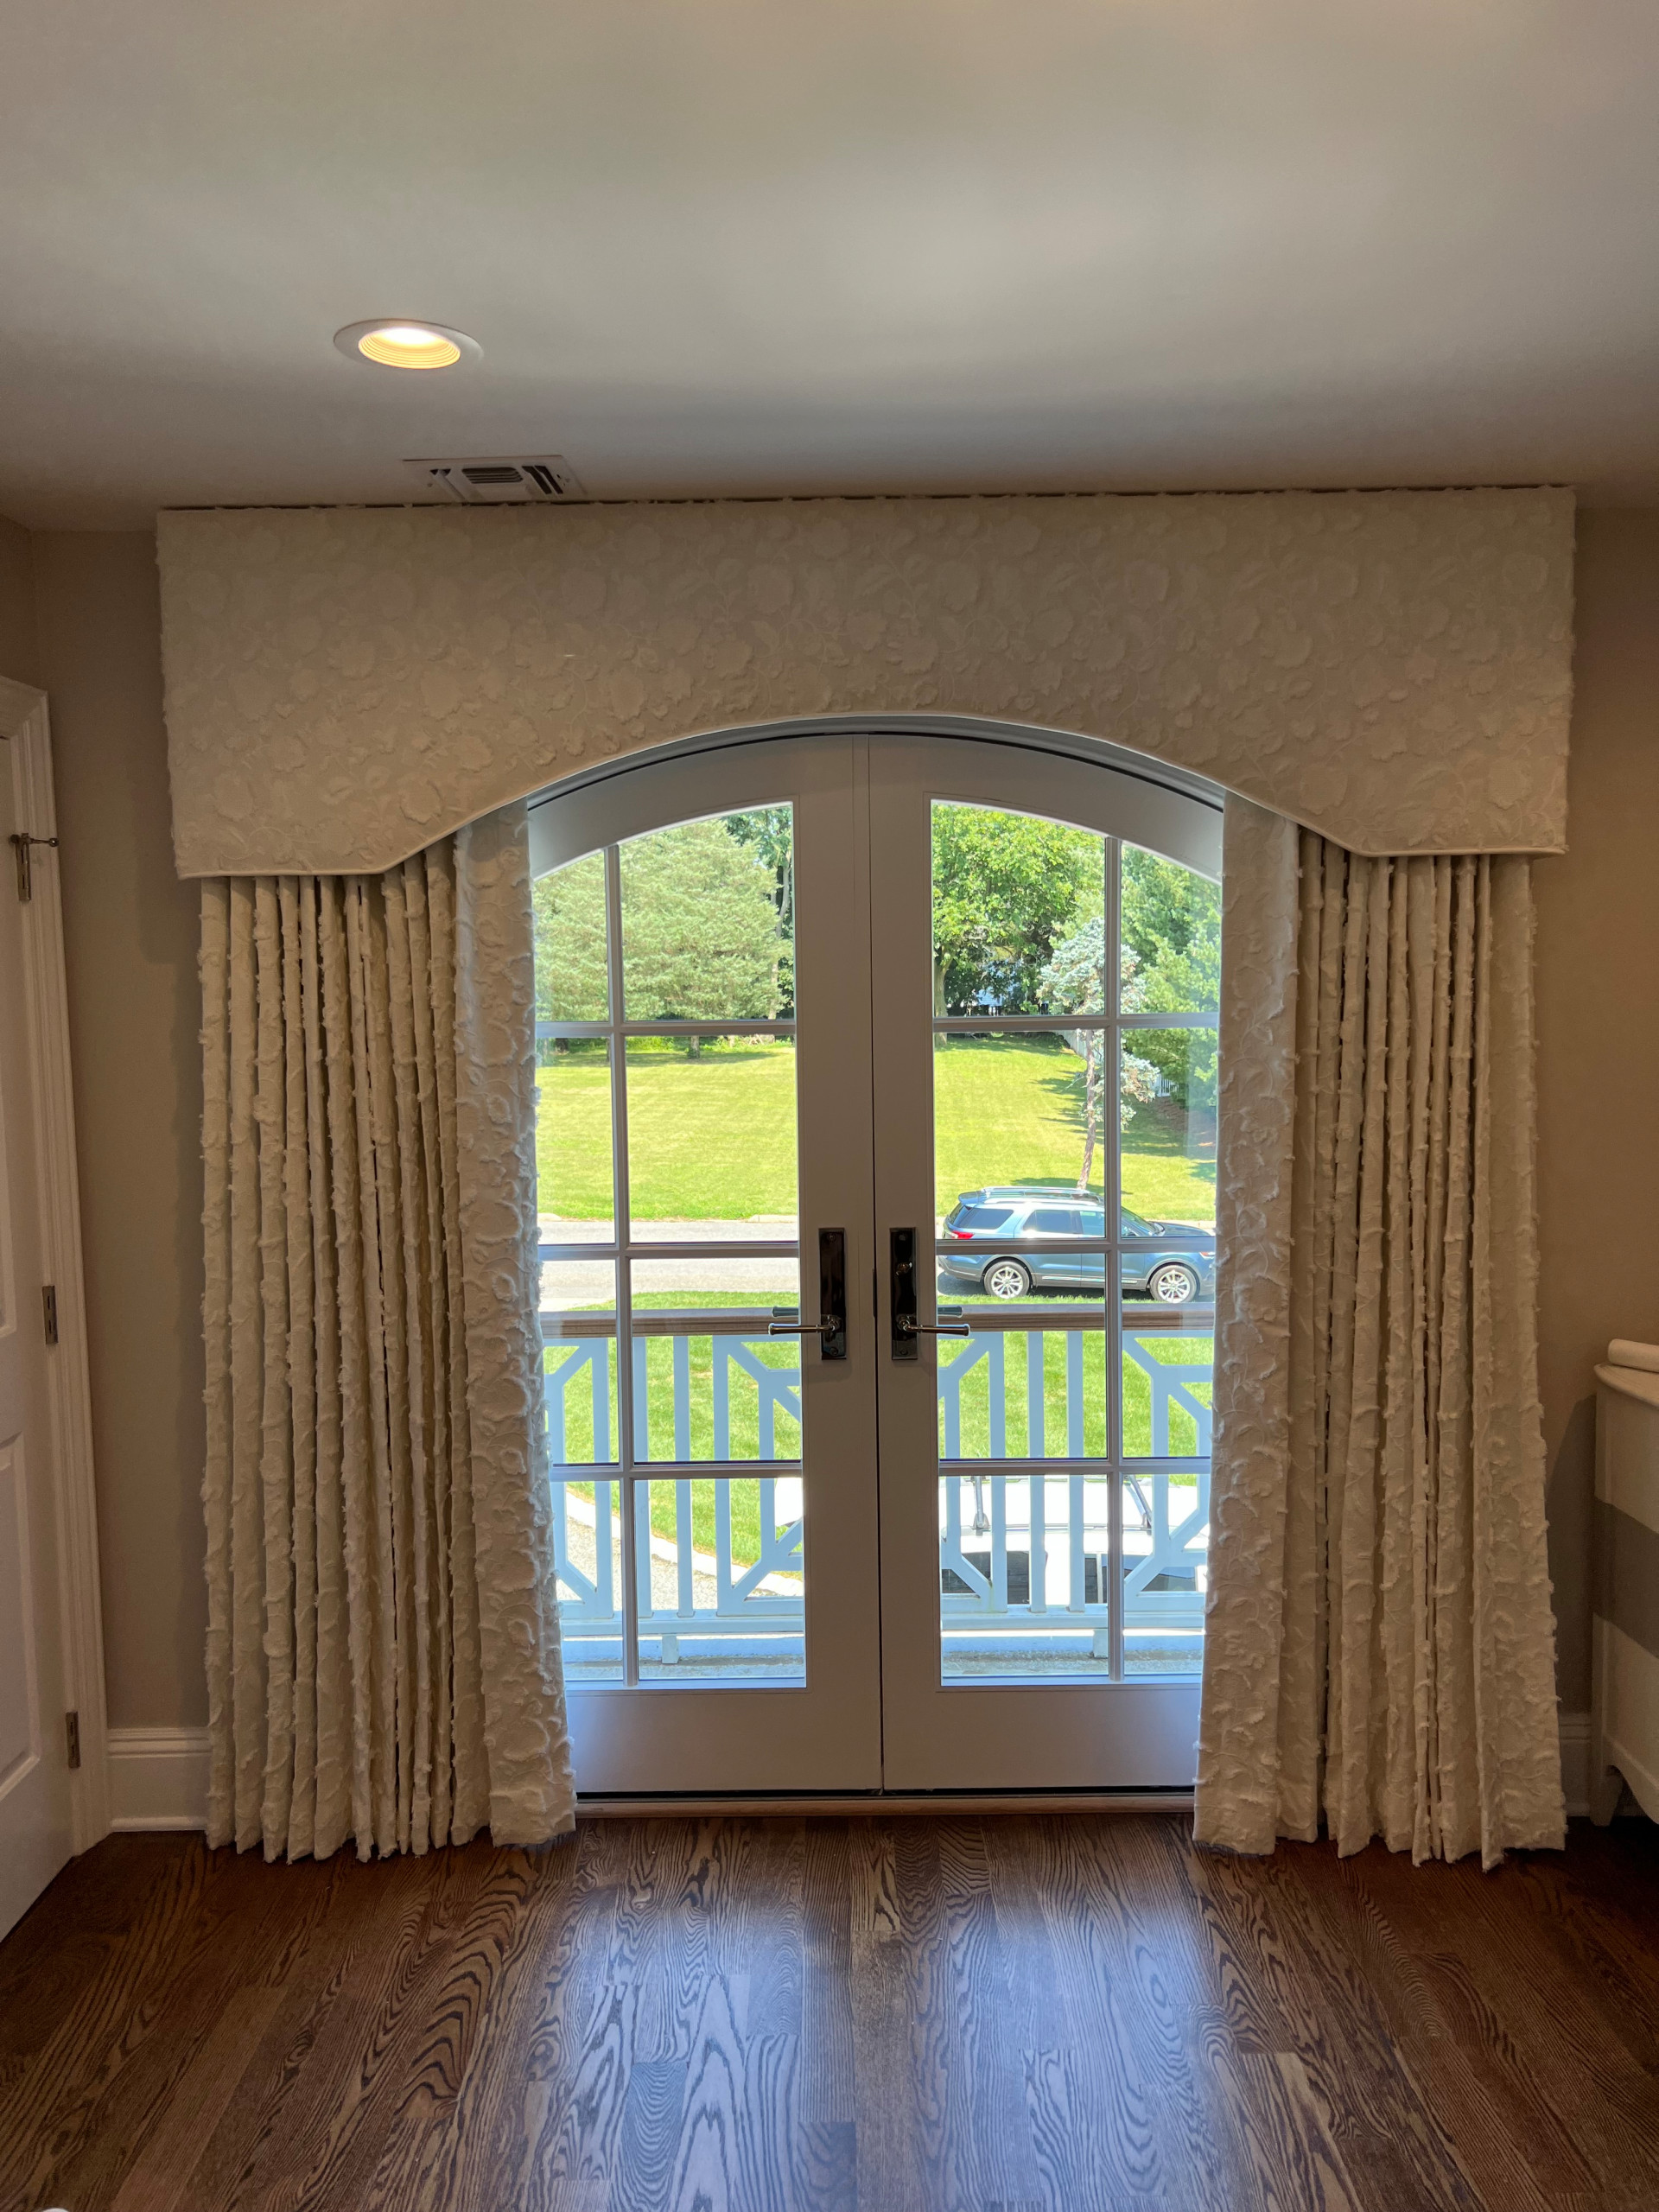 Arch Cornice on Bedroom French Doors